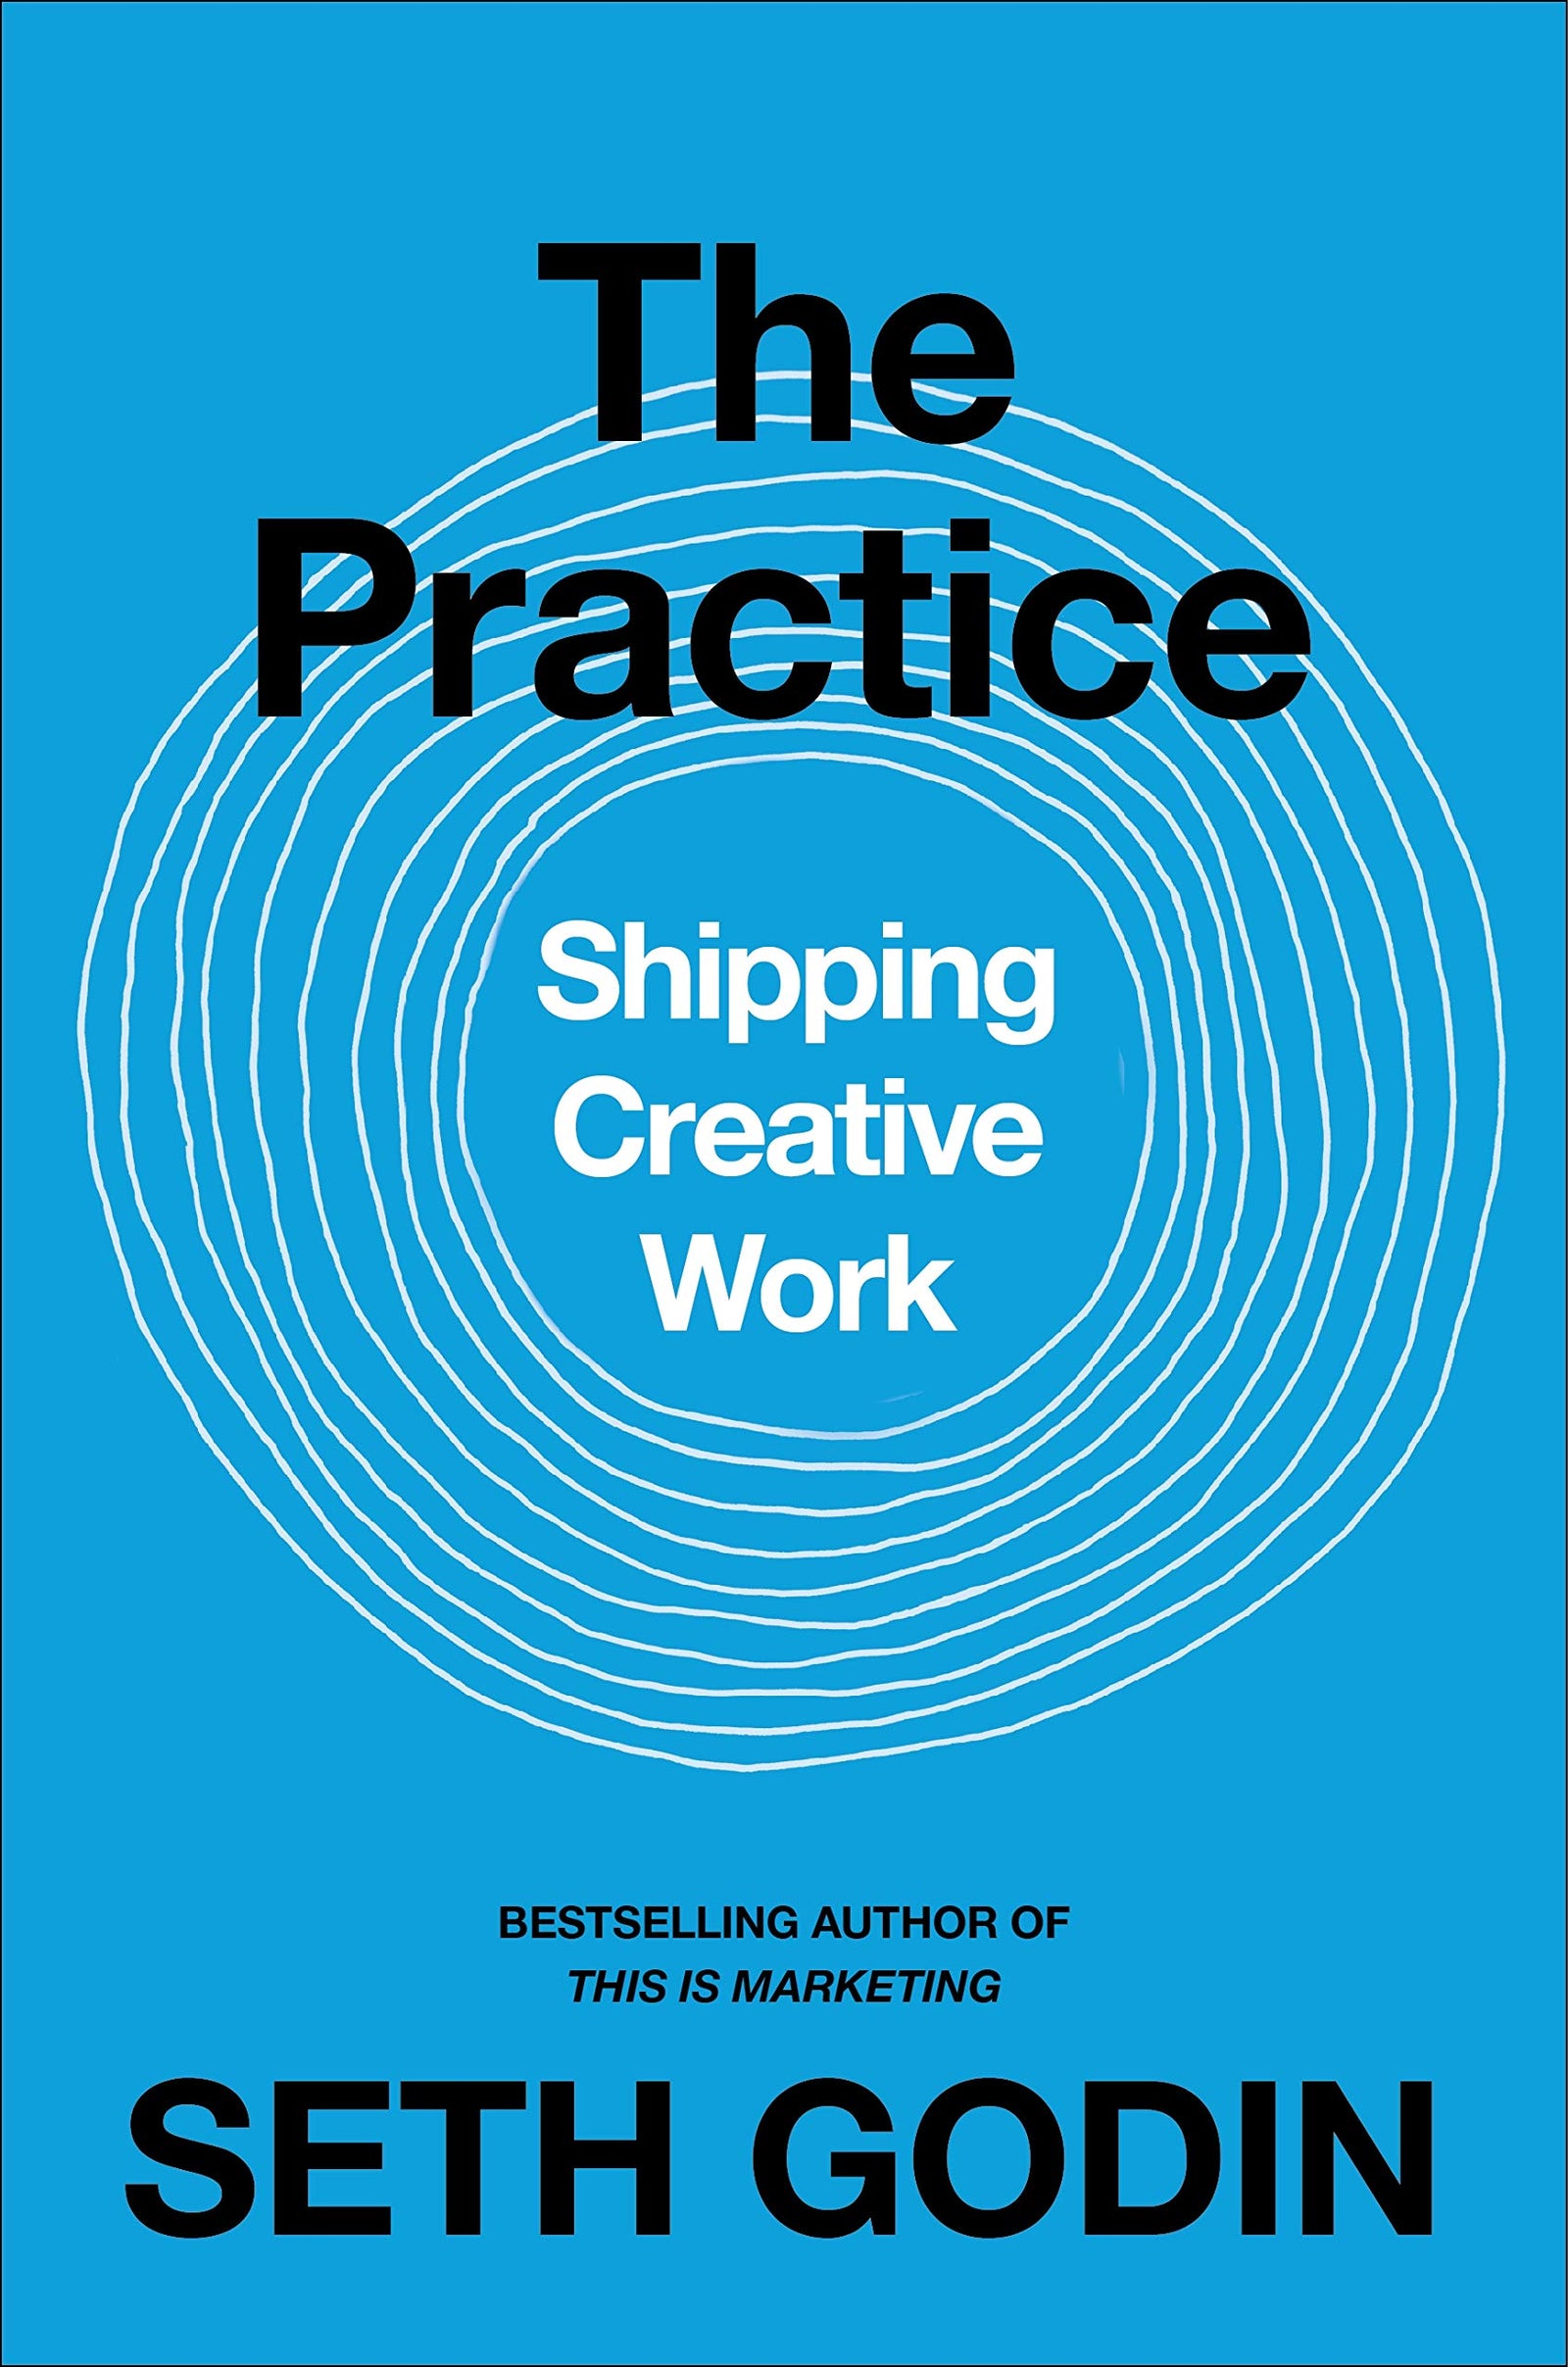 The Practice: Shipping creative work